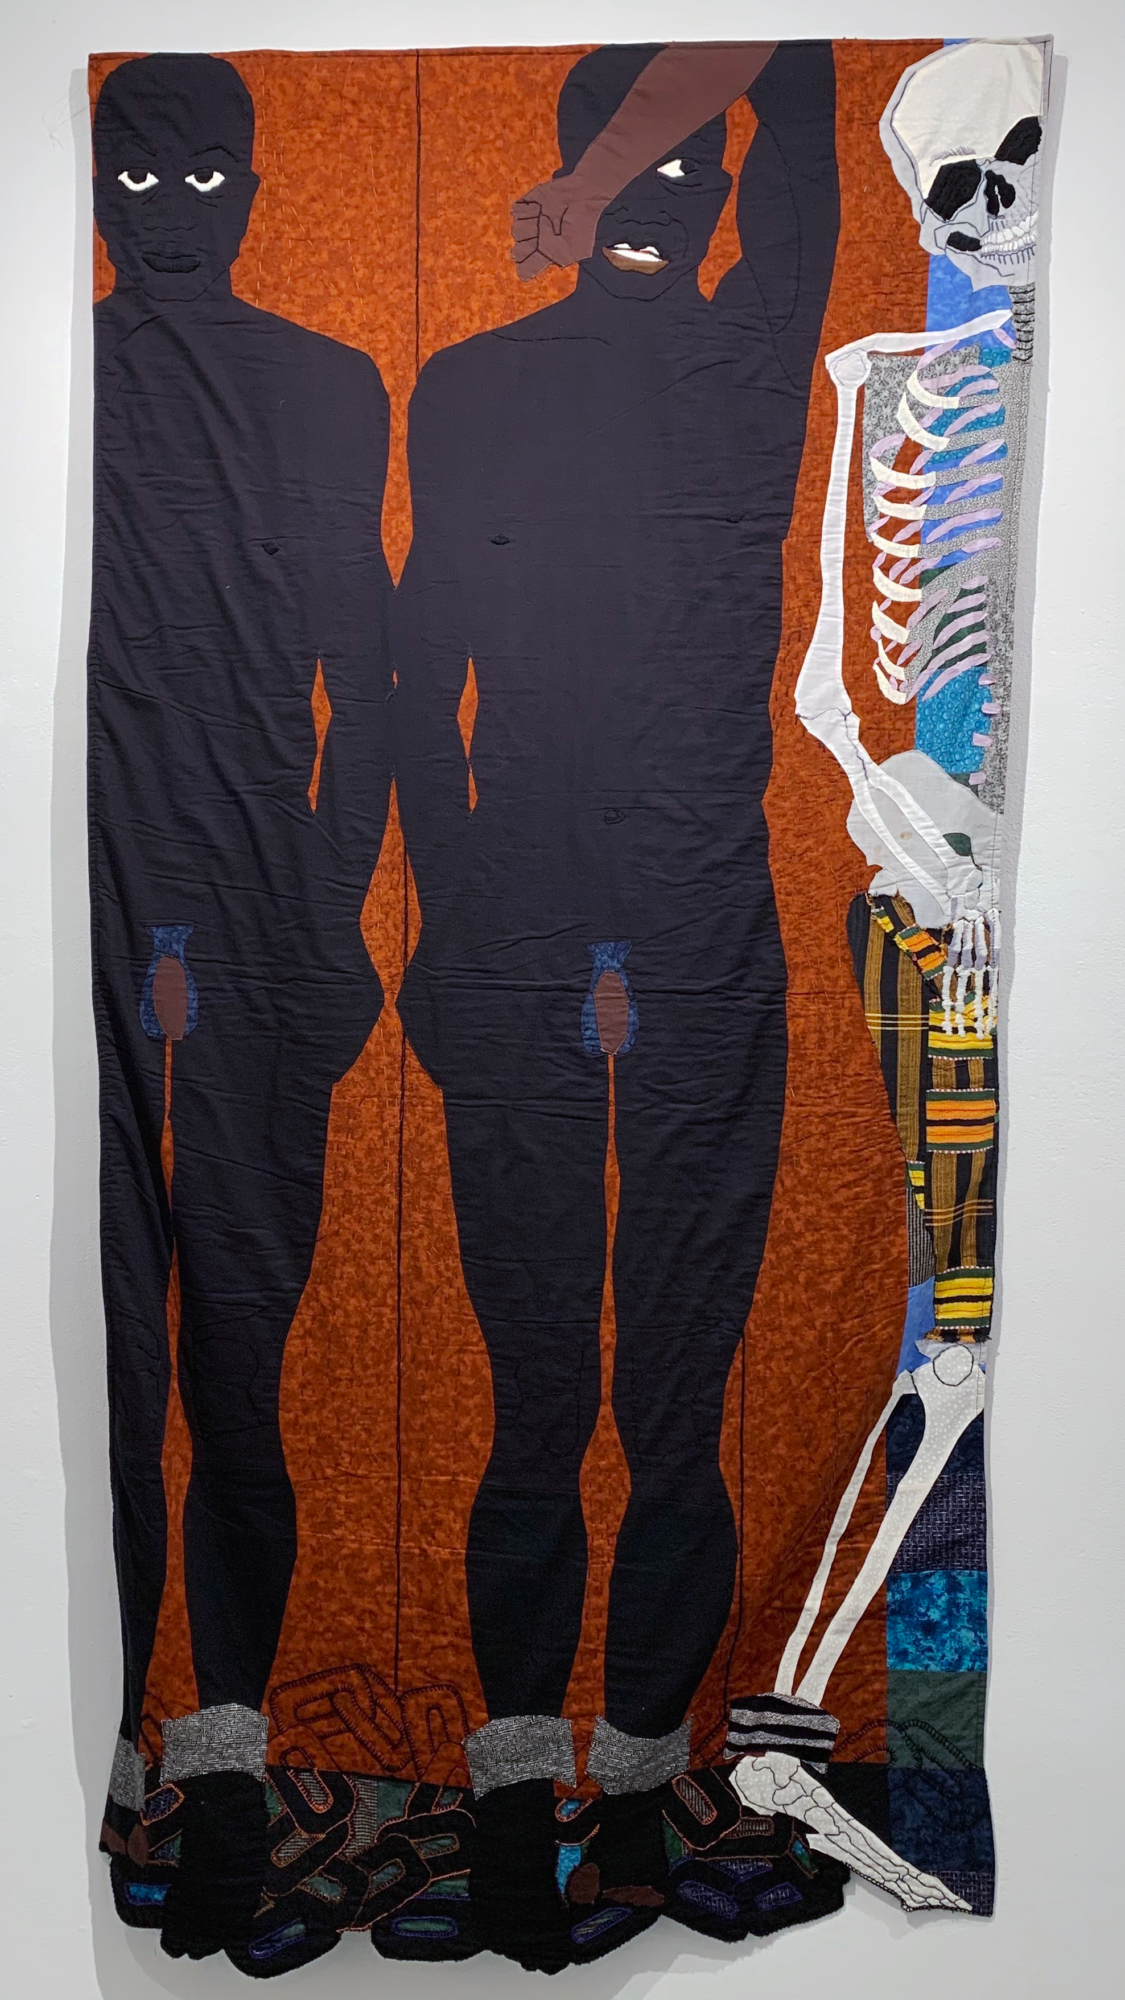 Cloth painting depicting two Black men chained together at their feet, and a human skeleton, set against a dark orange blackground